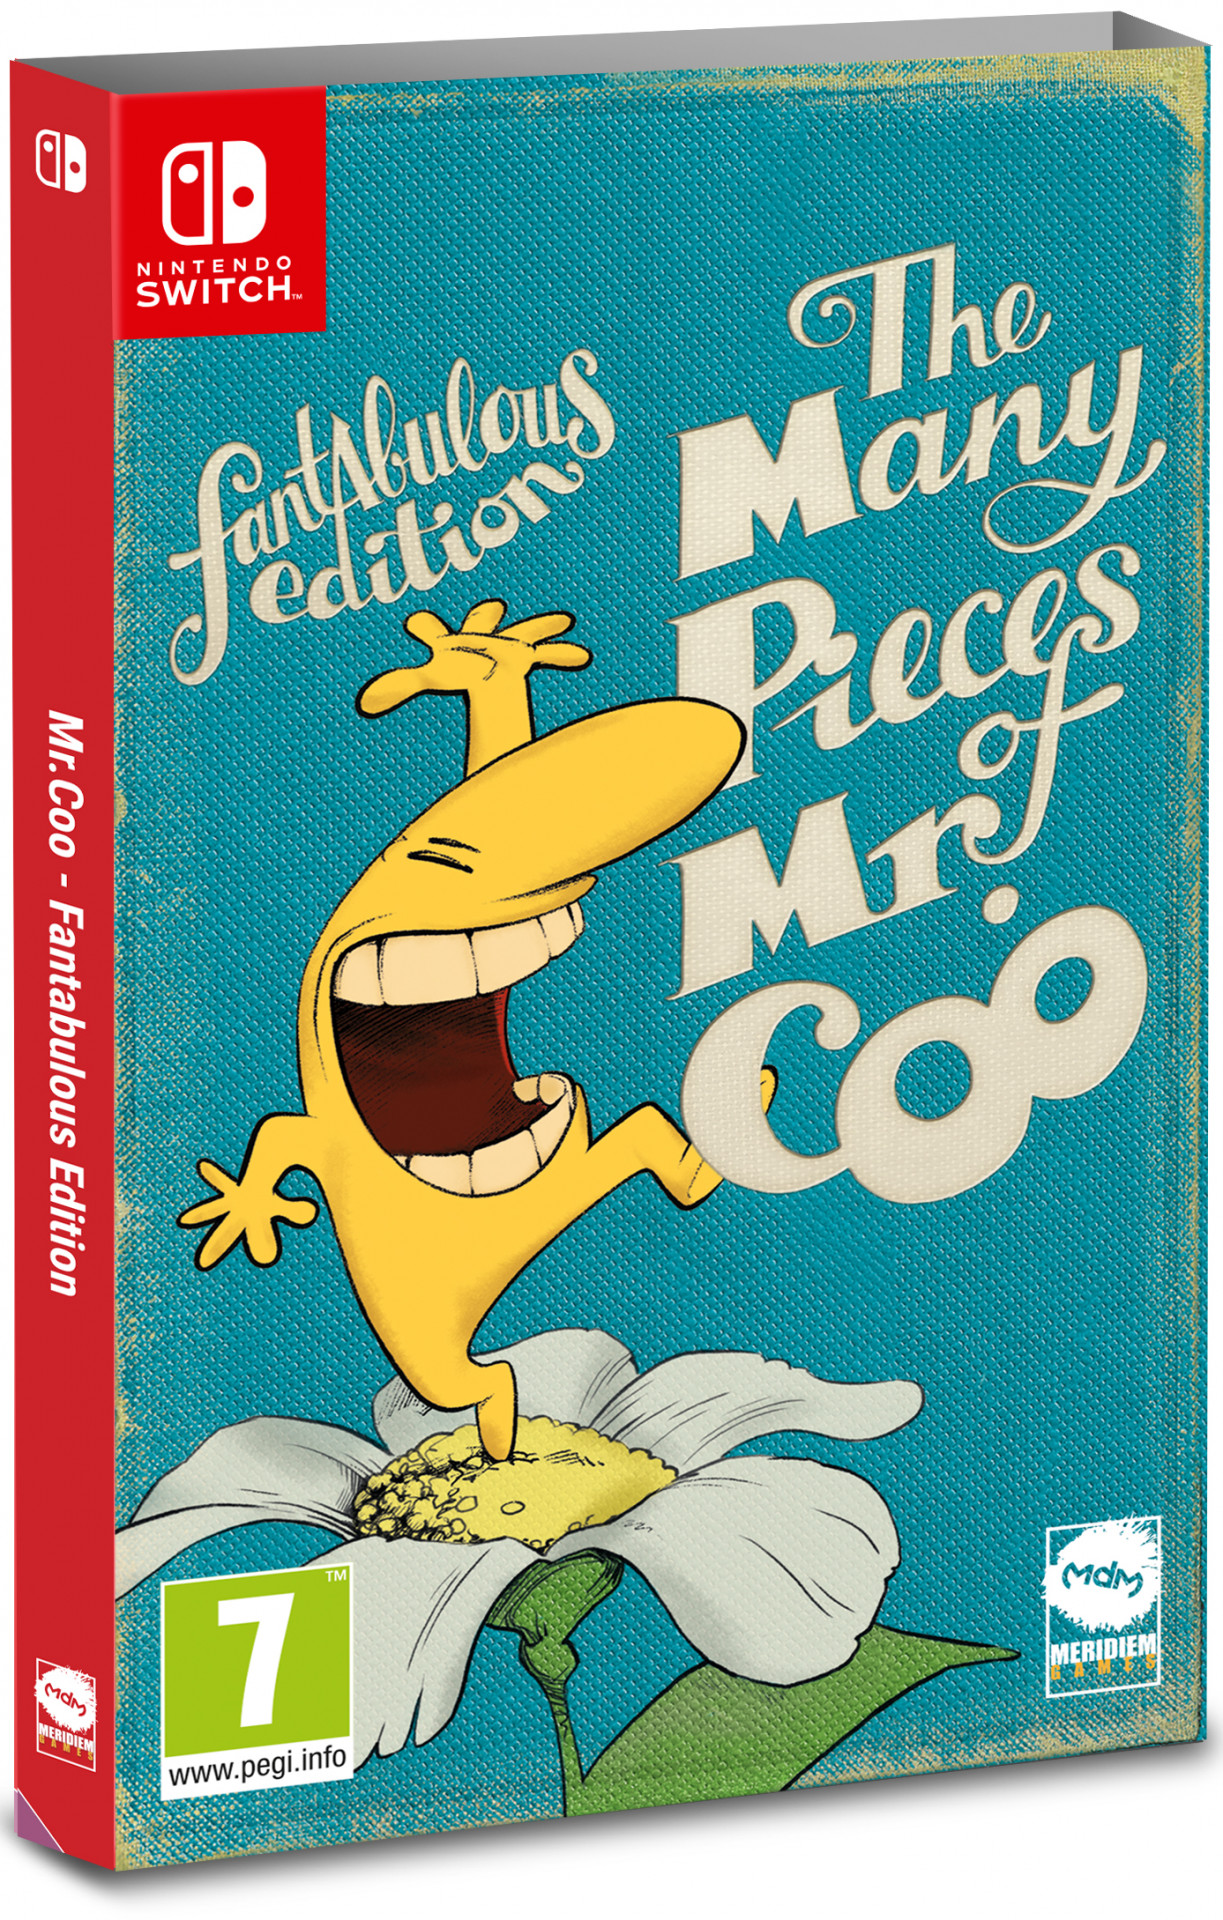 The Many Pieces of Mr. Coo: Fantabulous Edition - Nintendo Switch